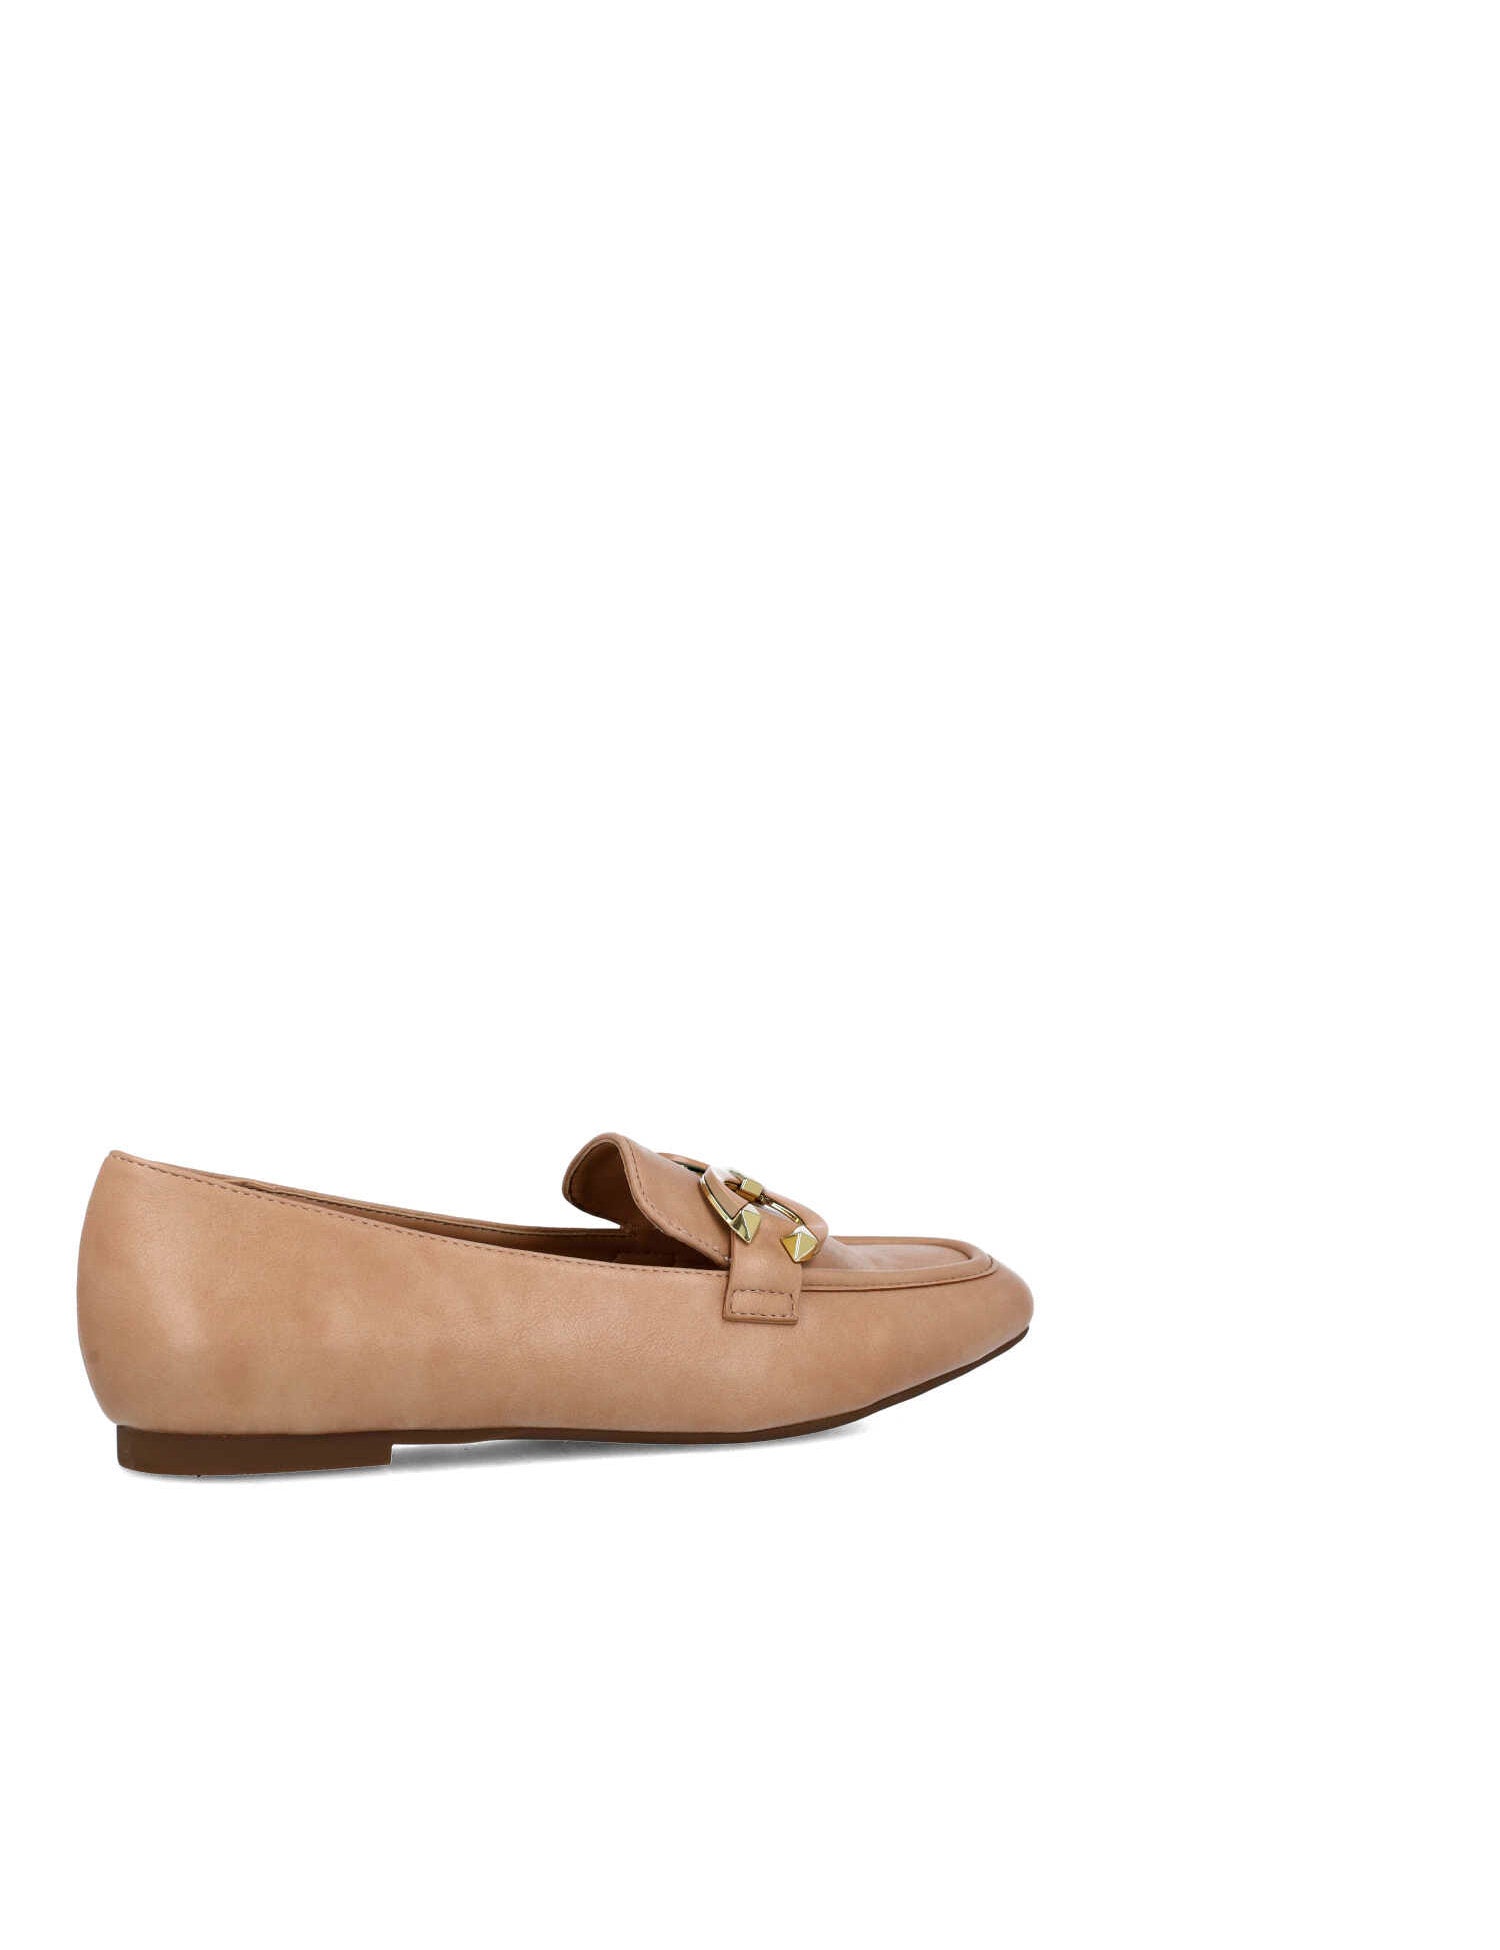 Beige Loafers With Stud Embellishment_24906_87_03